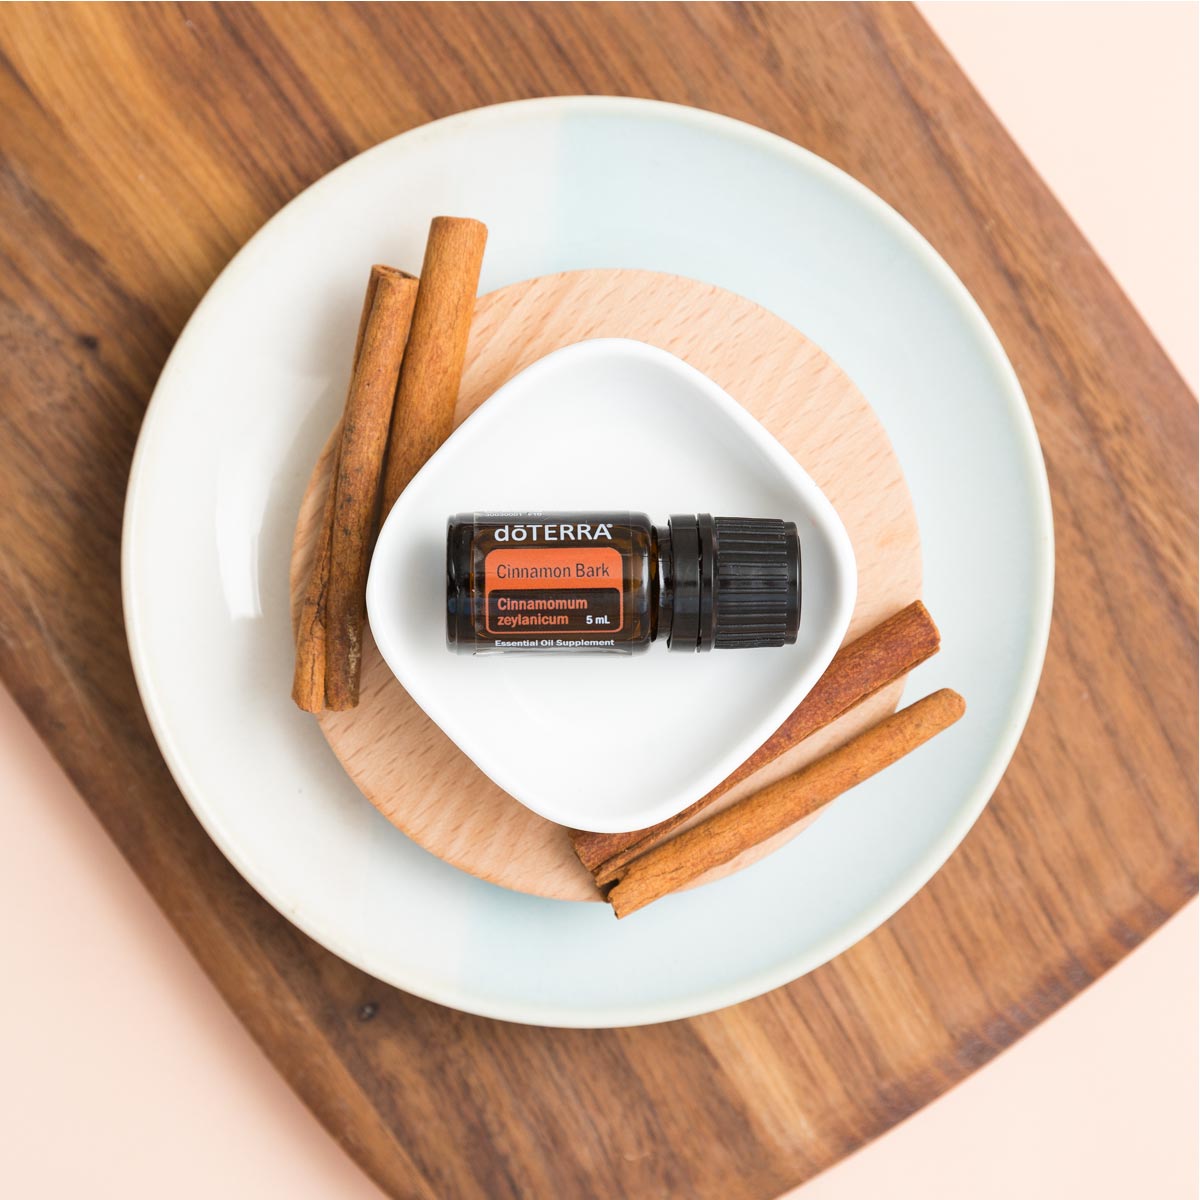 Cinnamon essential oil bottle on a plate next to fresh cinnamon spices. Can you eat Cinnamon oil? When used in appropriate amounts, Cinnamon essential oil can be used in cooking to flavor food and beverages.